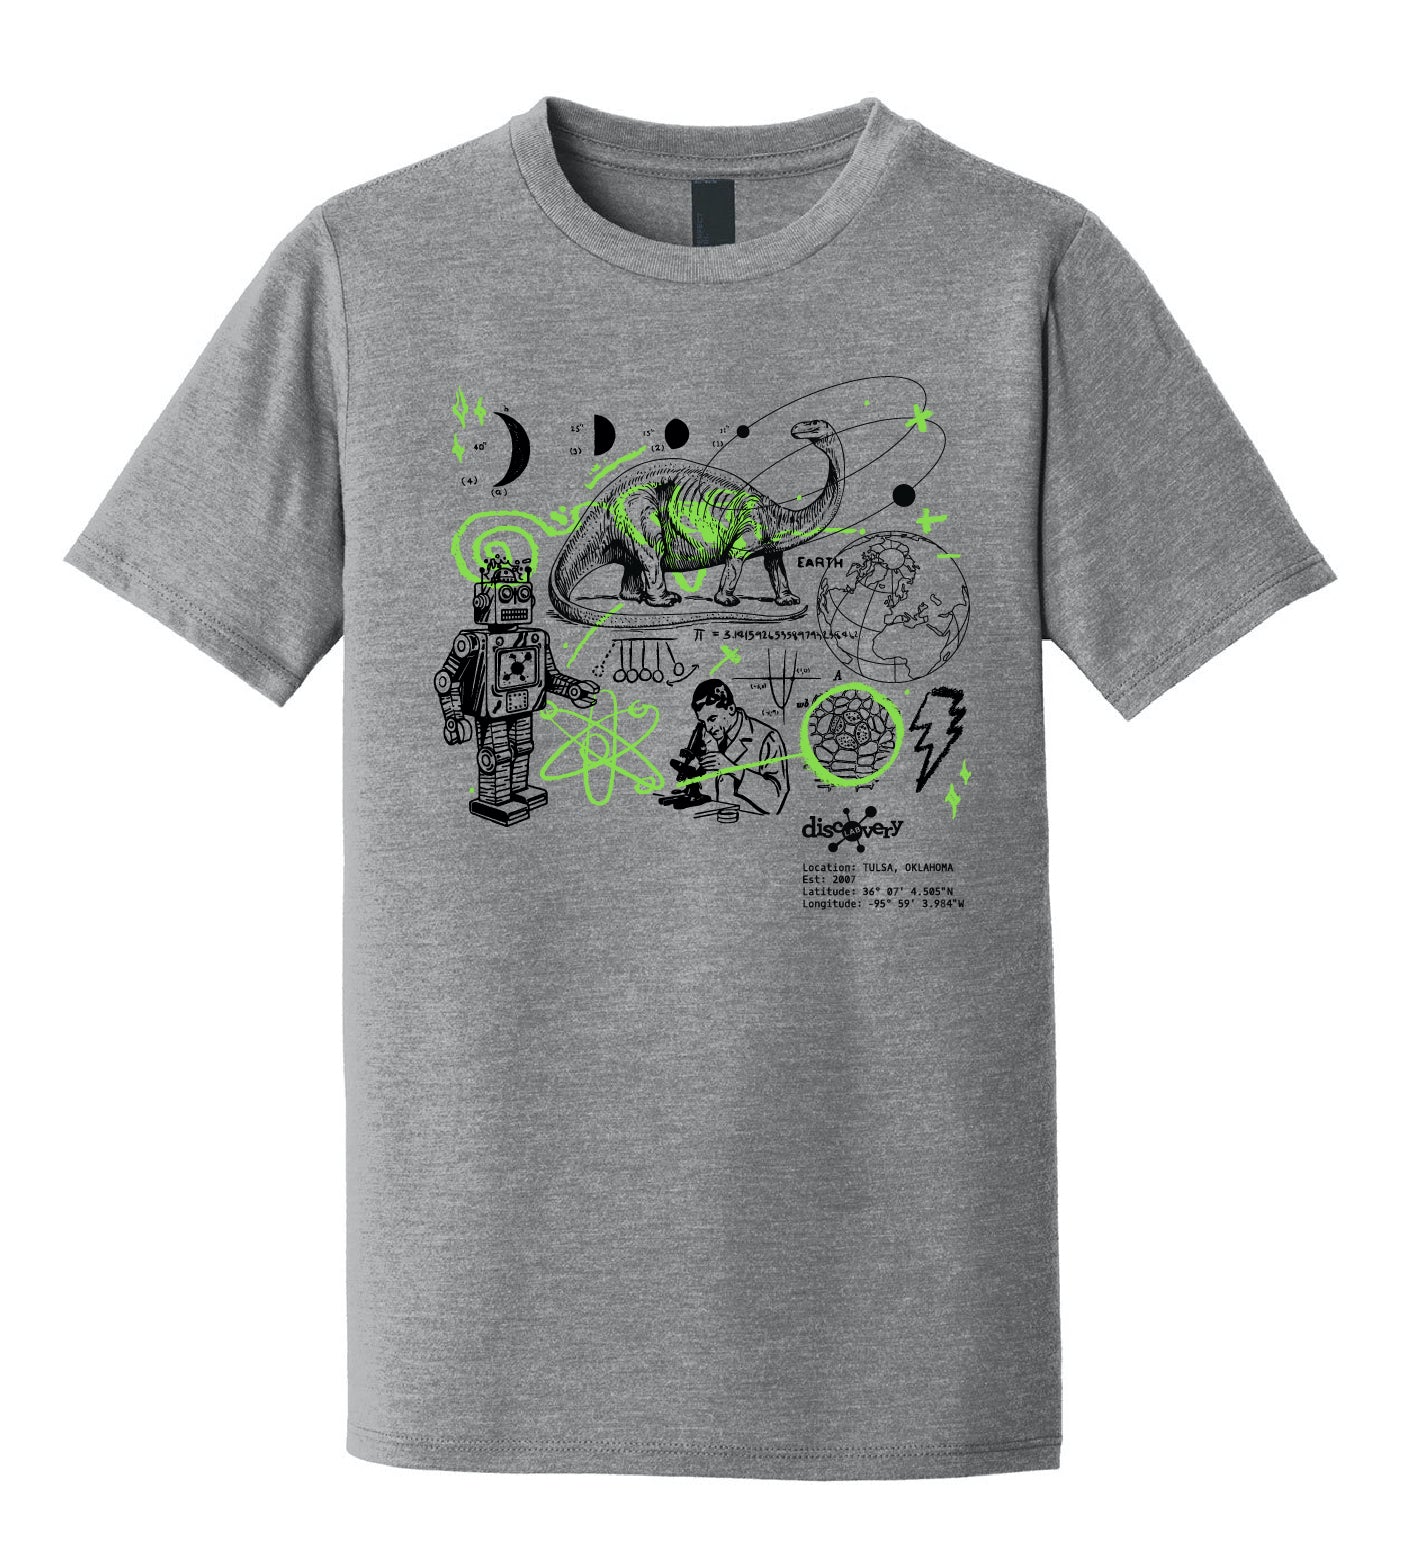 Science Schematic Tee - Stemcell Science Shop